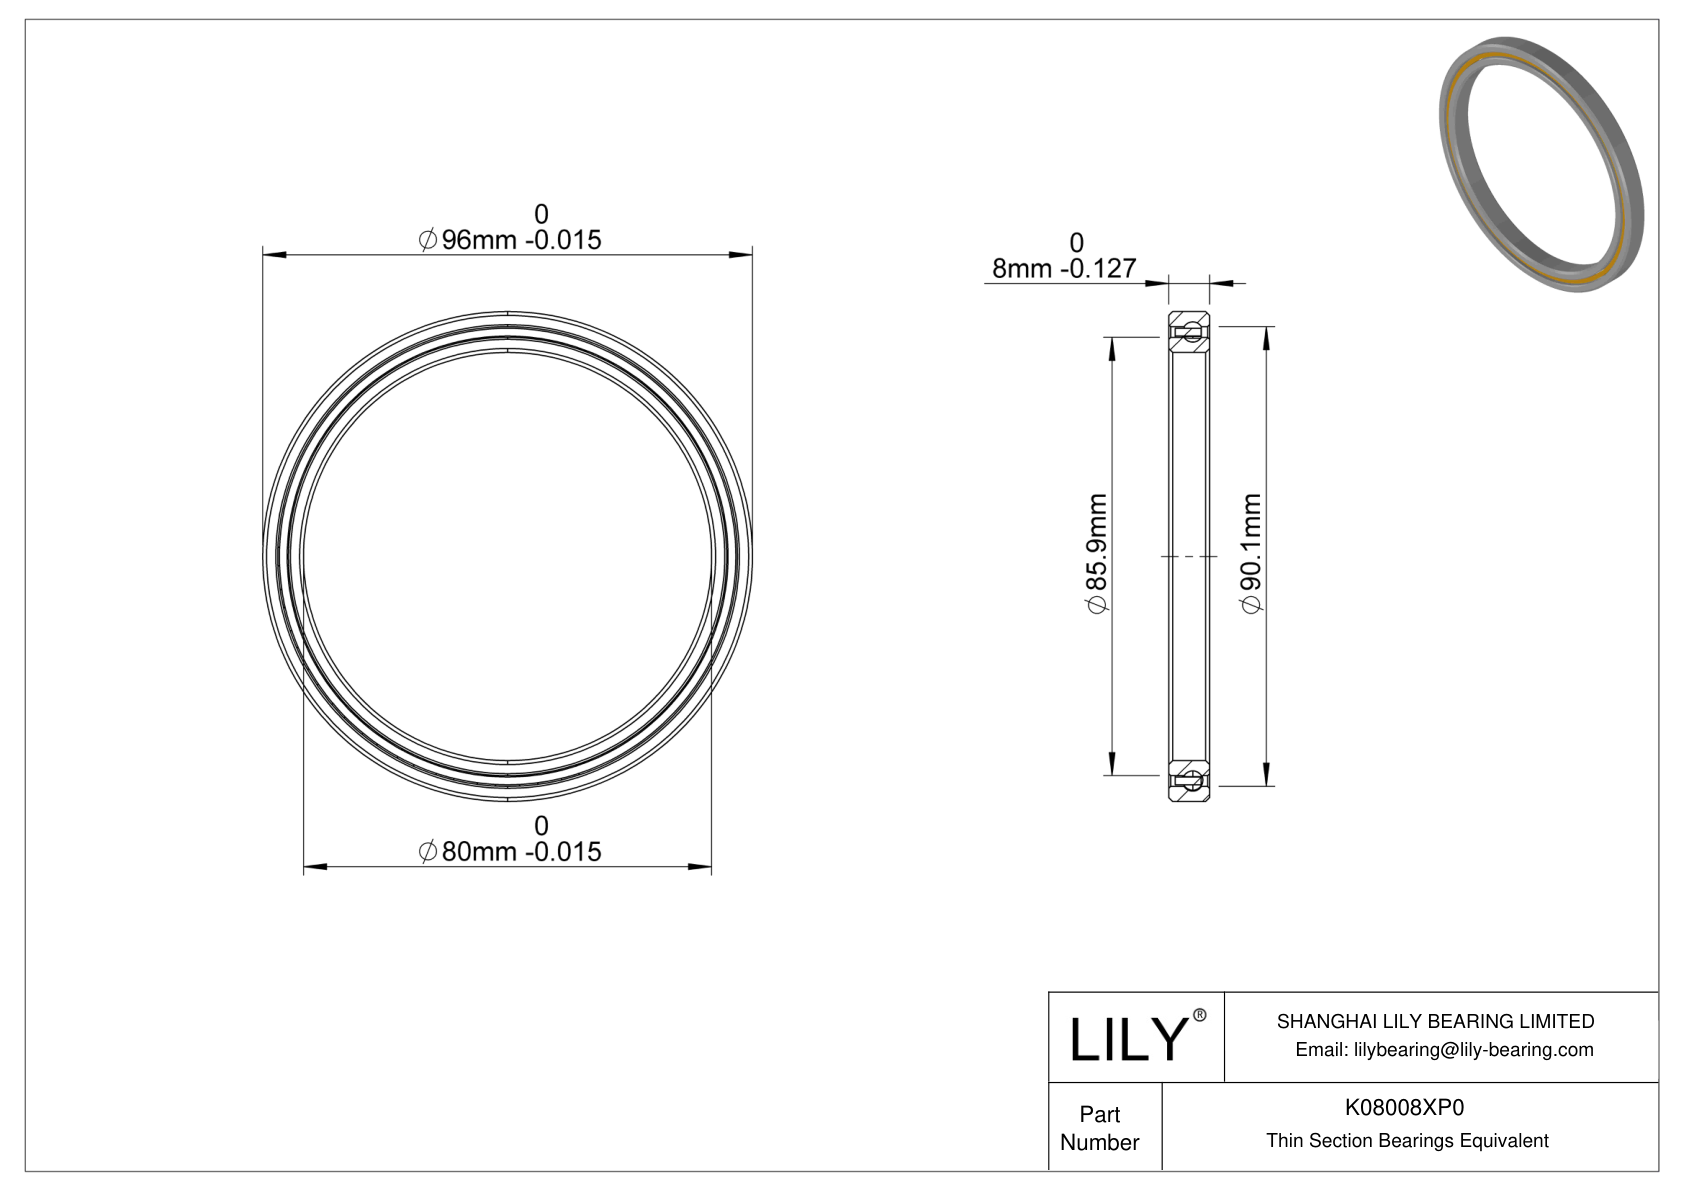 K08008XP0 Constant Section (CS) Bearings cad drawing